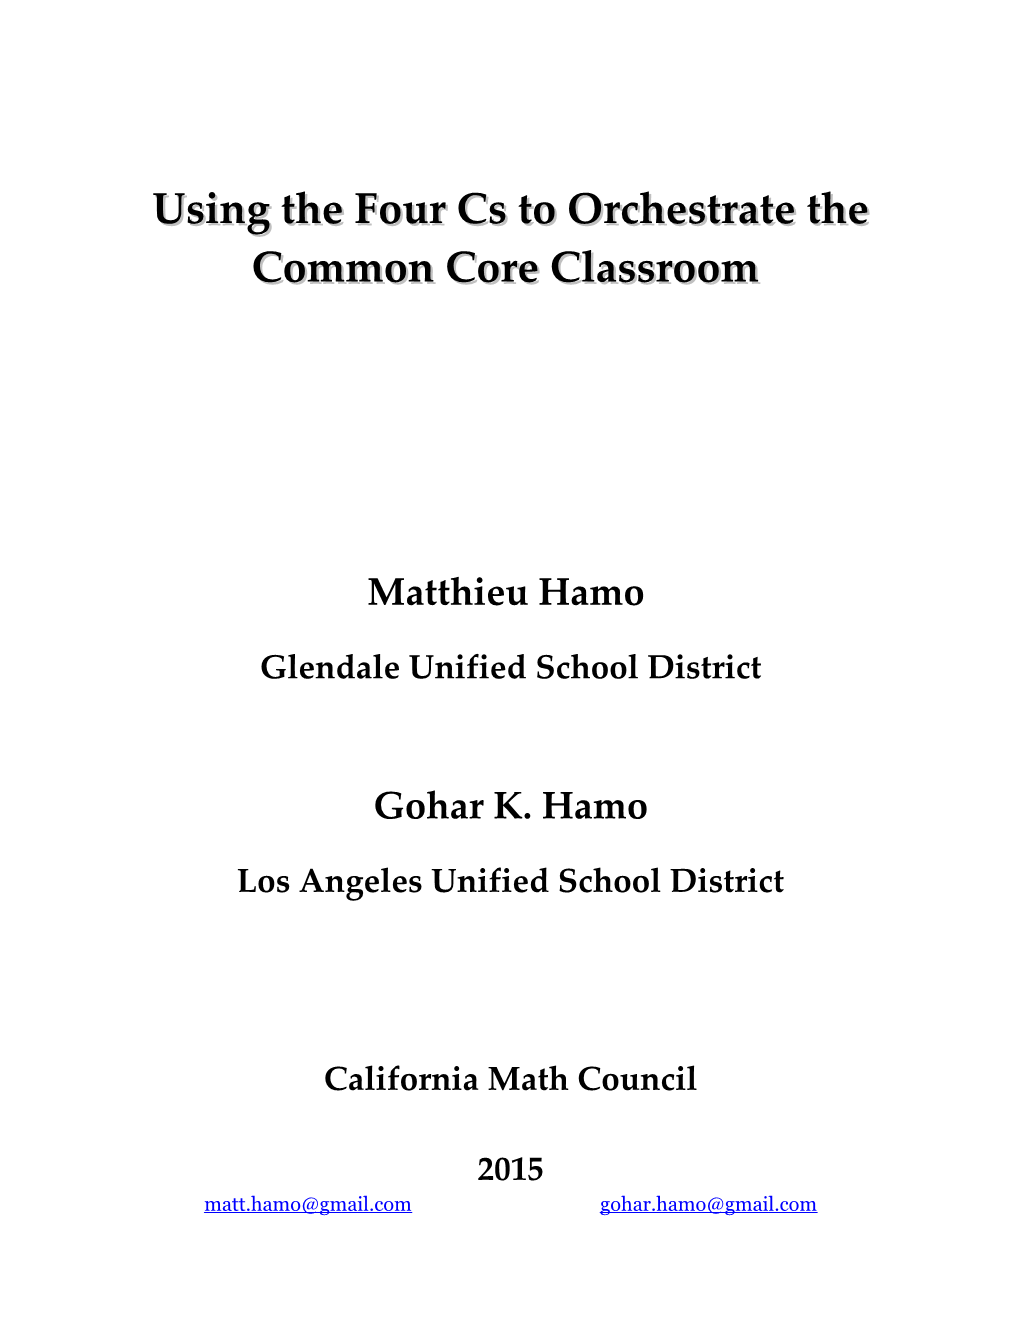 Using the Four Cs to Orchestrate the Common Core Classroom